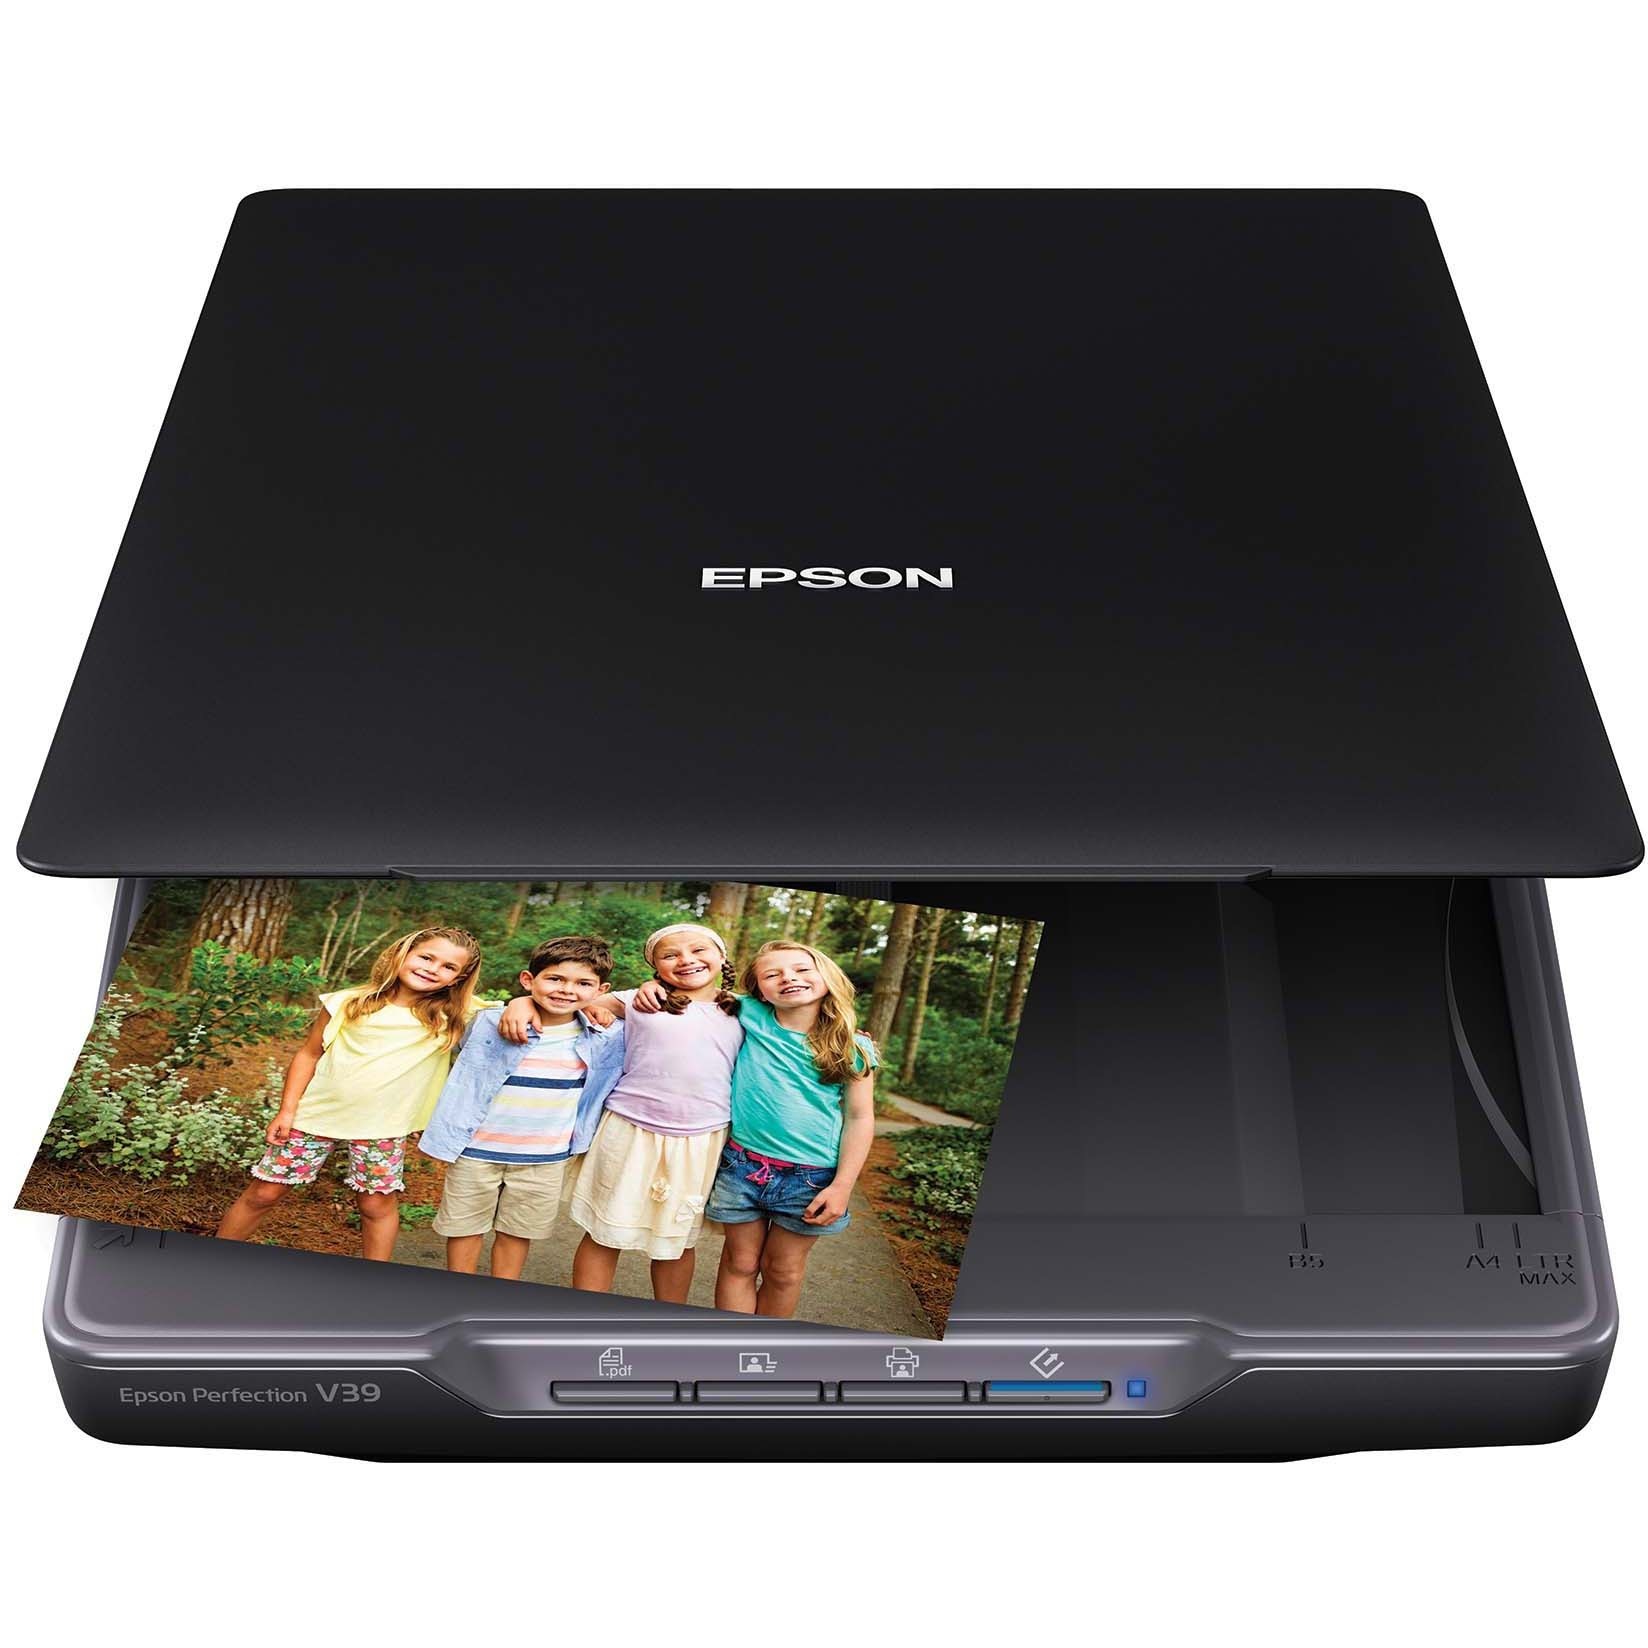 Epson Perfection V39 Photo A4 Flatbed Scanner B11b232501 Ascent Nz 3715